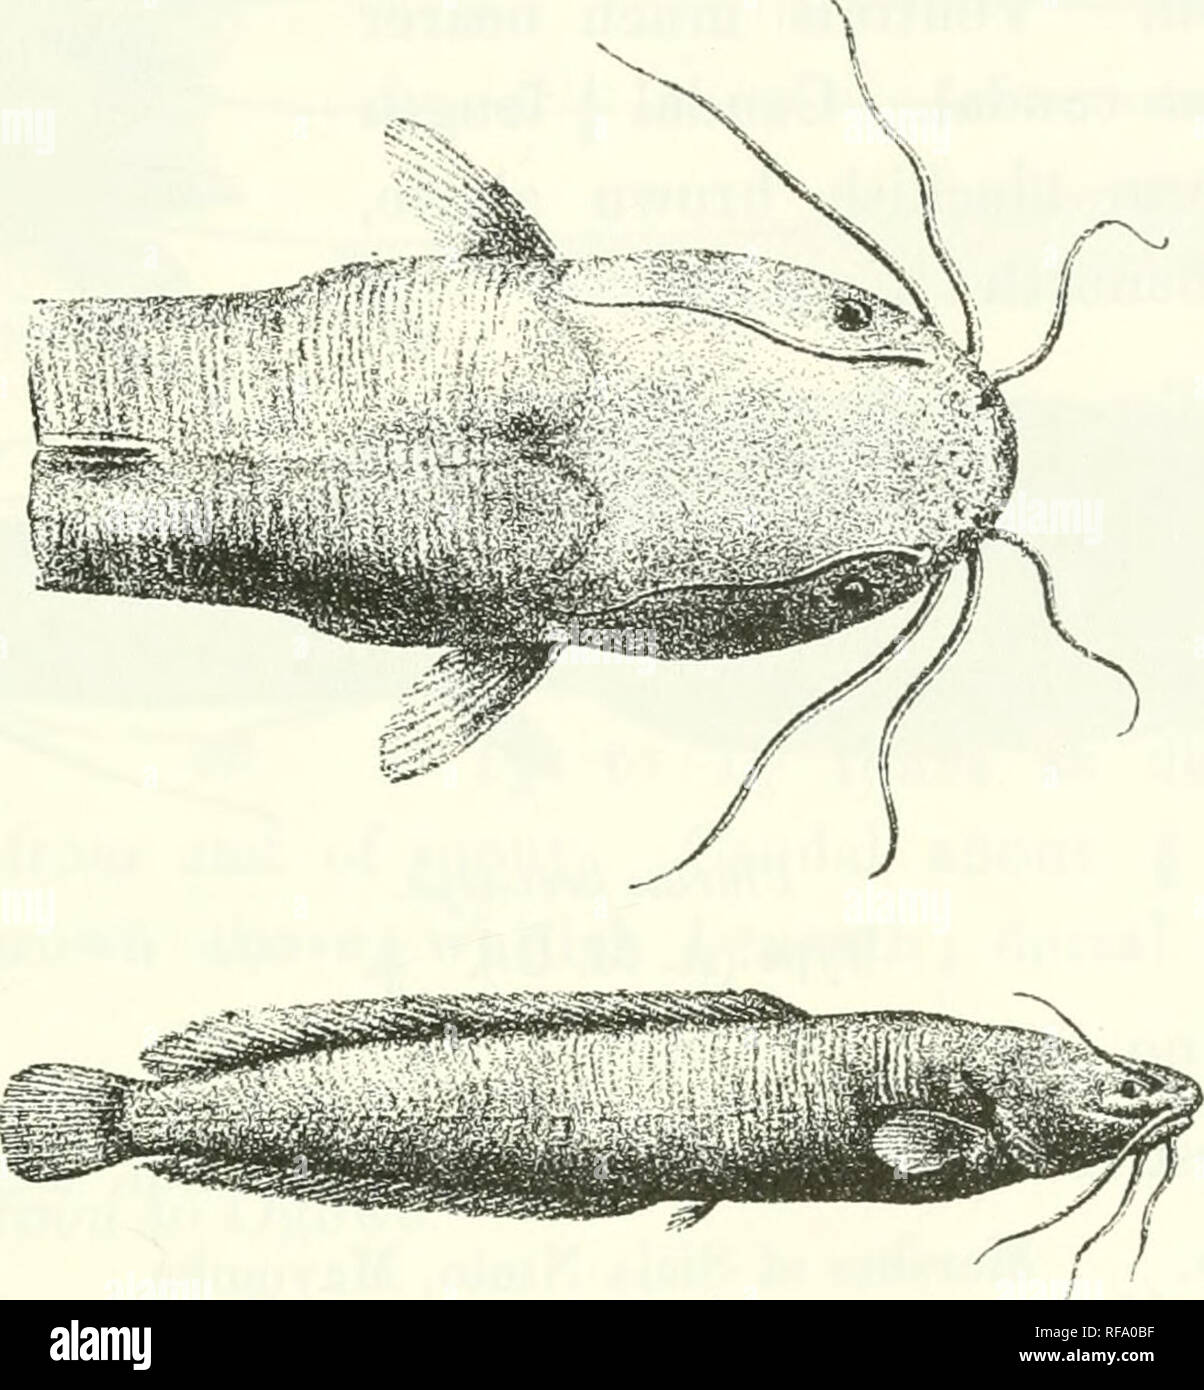 . Catalogue of the fresh-water fishes of Africa in the British Museum (Natural History). Fishes; Freshwater animals. CLARIAS. 247 length of tlie fin. Ventrals much nearer end of snout than caudal. Caudal ^ length of head. Uniform blackish brown. Total length 140 millim. Lake Tanganyika ; Upper Ubanghi. Fig. 204.. 1-2. Types. 3. Ad. Clarias liocephalus. Type (Tr. Z. S. 1898). L. Tanganyika. Banzyville, Ubanghi. Prof. J. E. S. Moore (C. Capt. Royaux (C). 17. CLARIAS BREVICEPS. Bouleng. Ann. Mus. Congo, Zool. i. p. 135, pi. xlviii. fig. 6 (1900), Poiss. Bass. Congo, p. 258, pi. xiii. fig. 1 (1901 Stock Photo